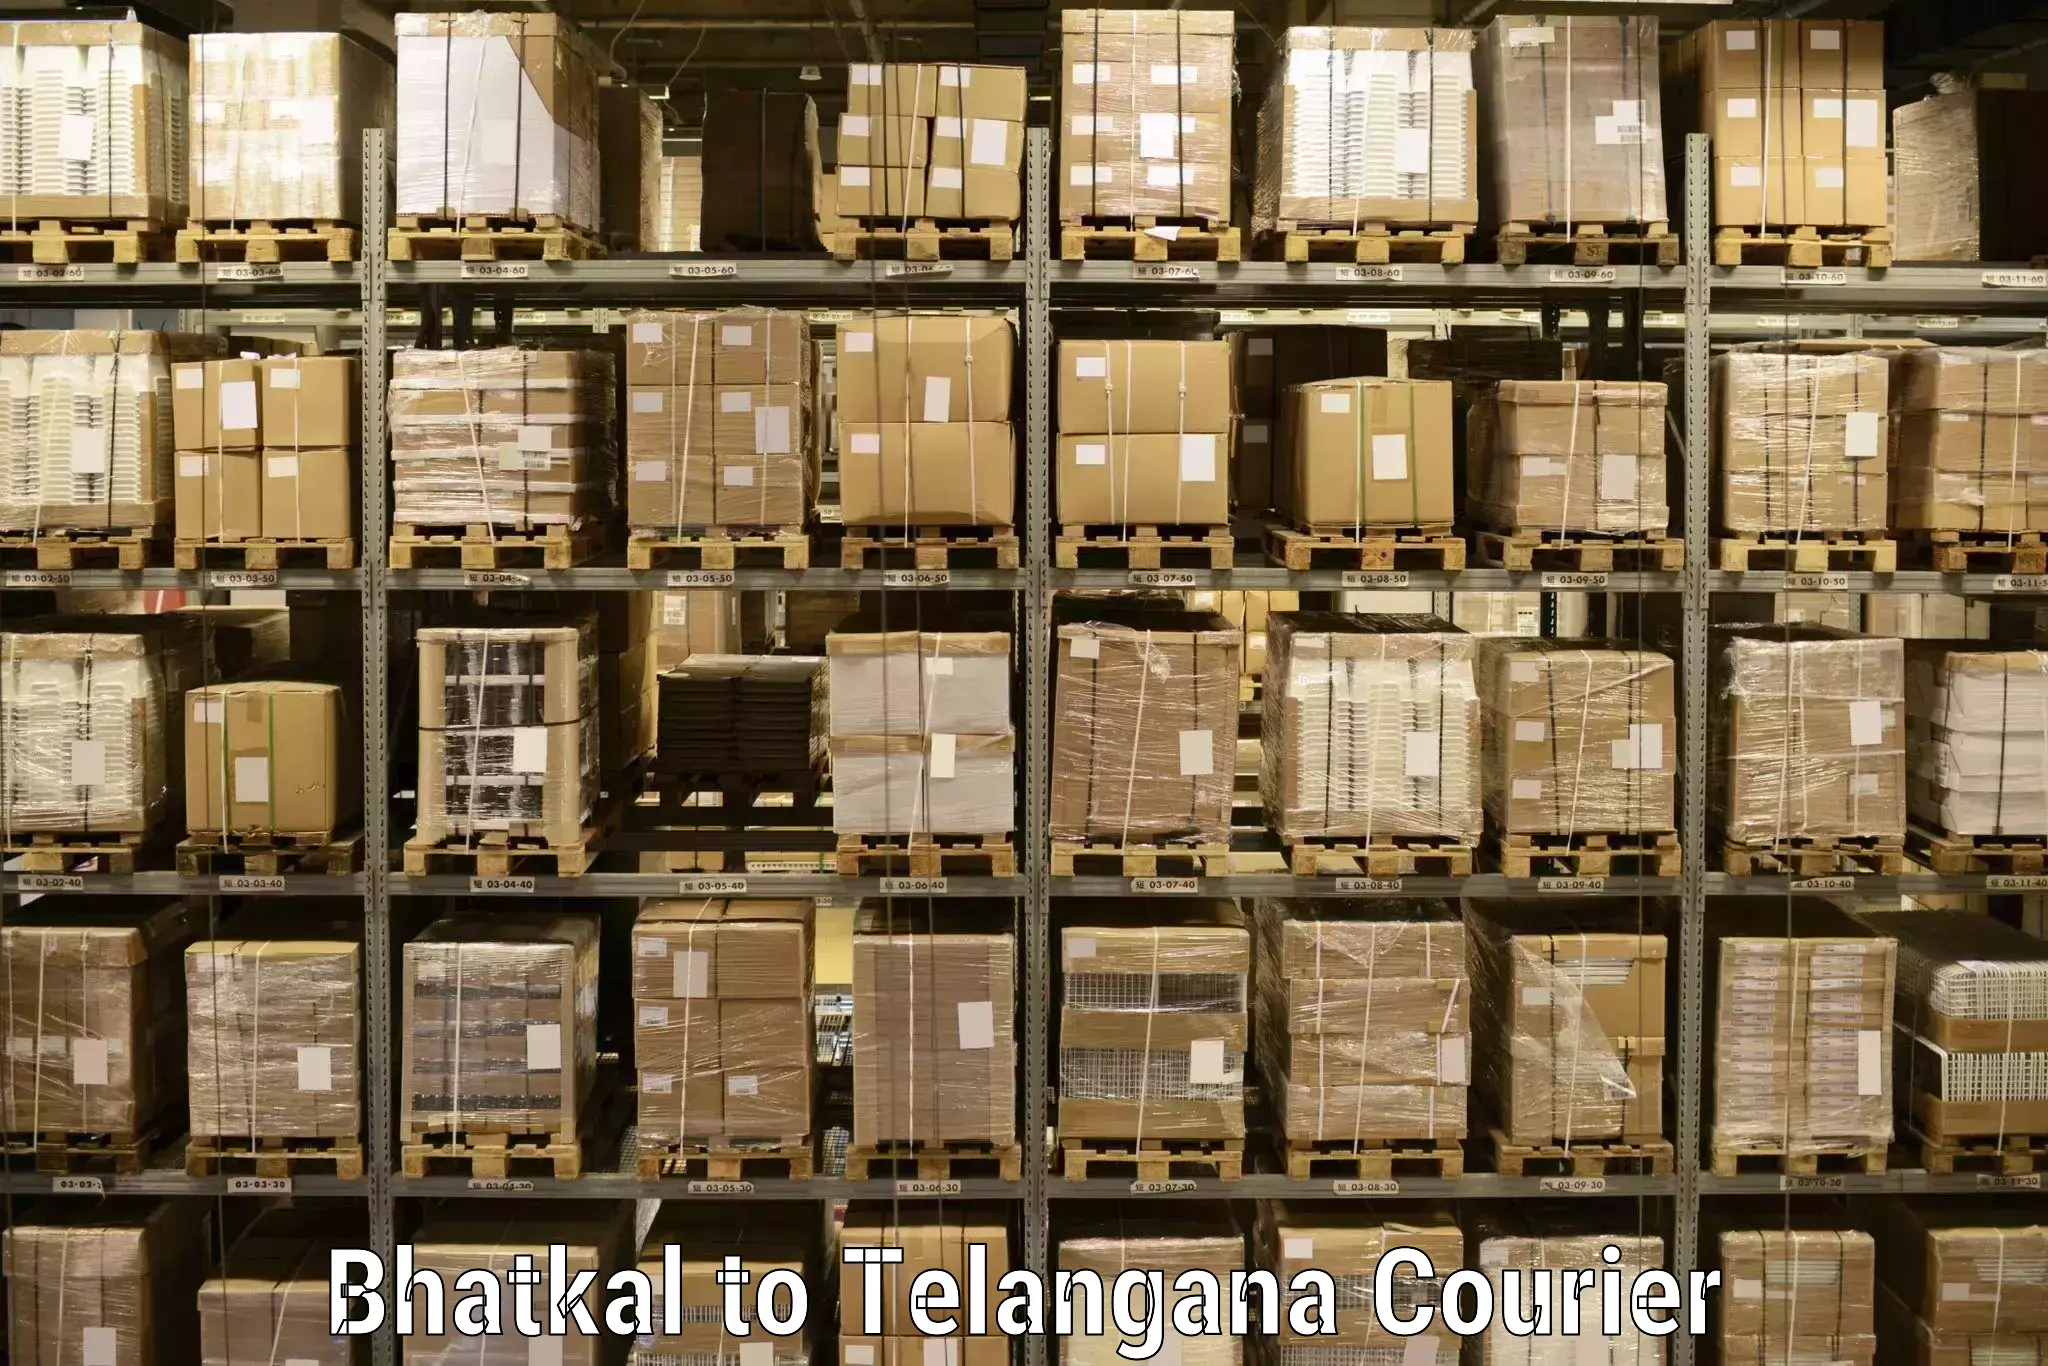 Courier service booking Bhatkal to Nalgonda